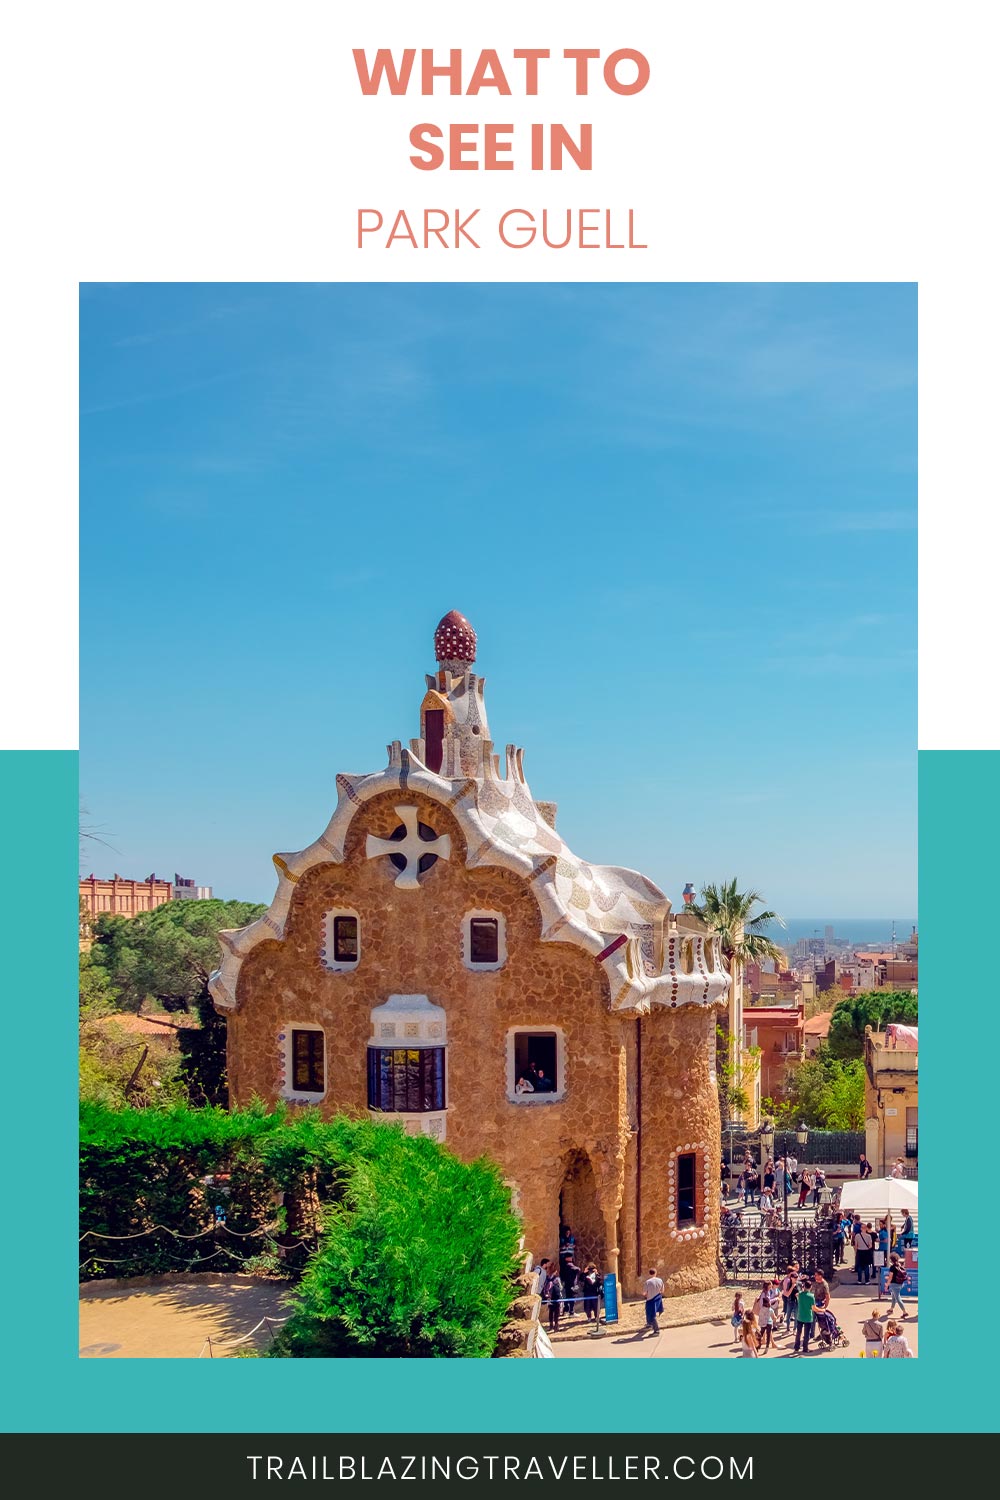 What To See in Park Guell